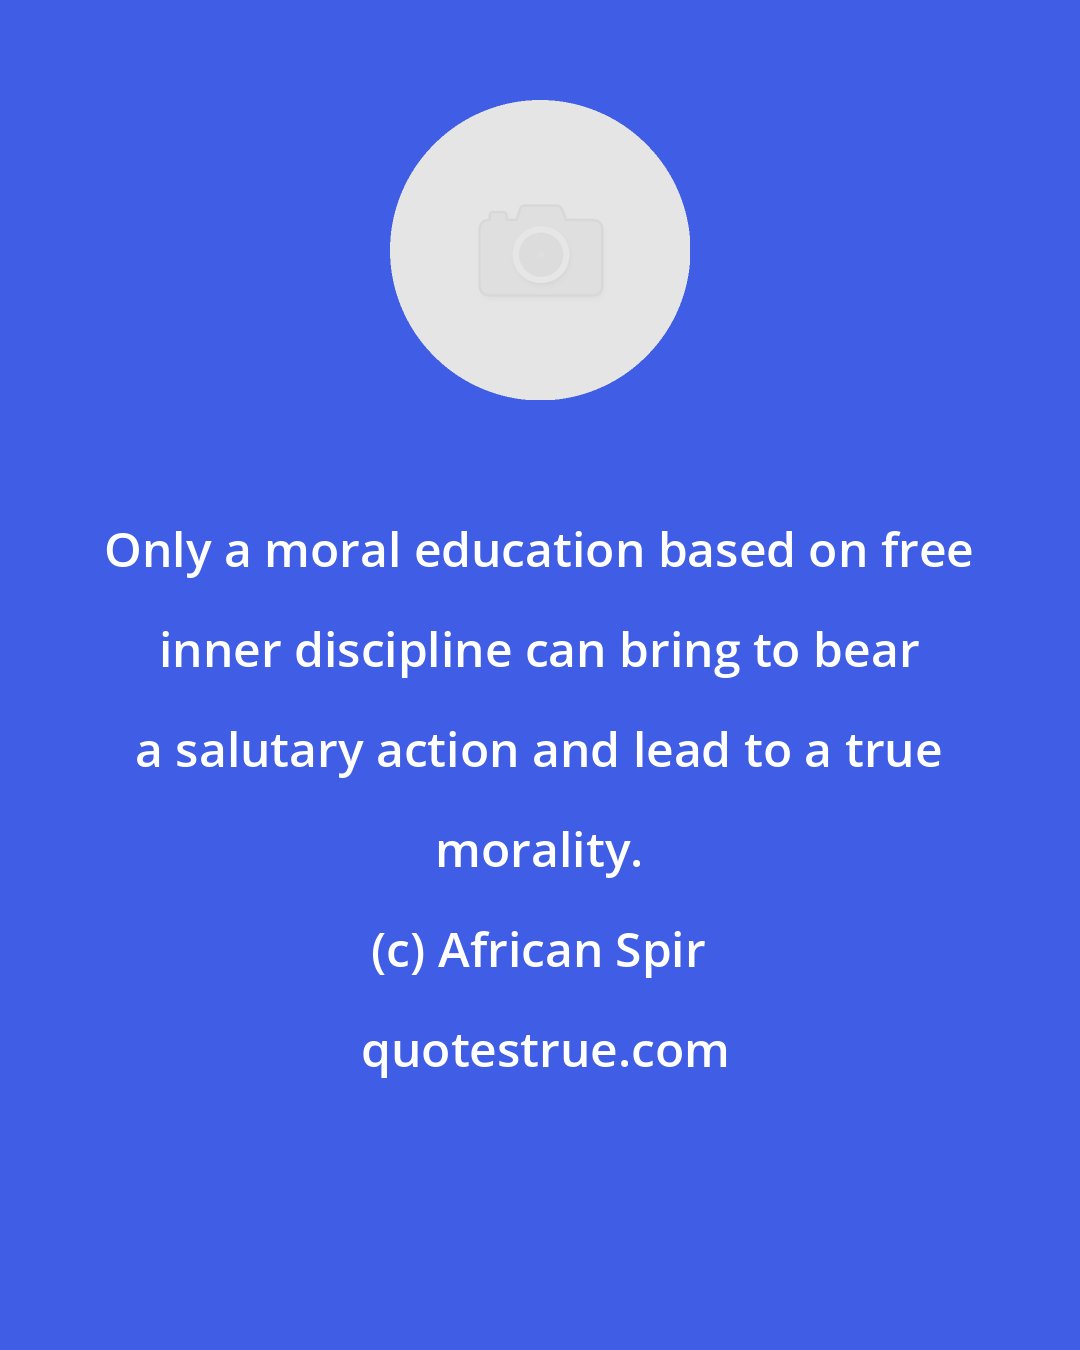 African Spir: Only a moral education based on free inner discipline can bring to bear a salutary action and lead to a true morality.